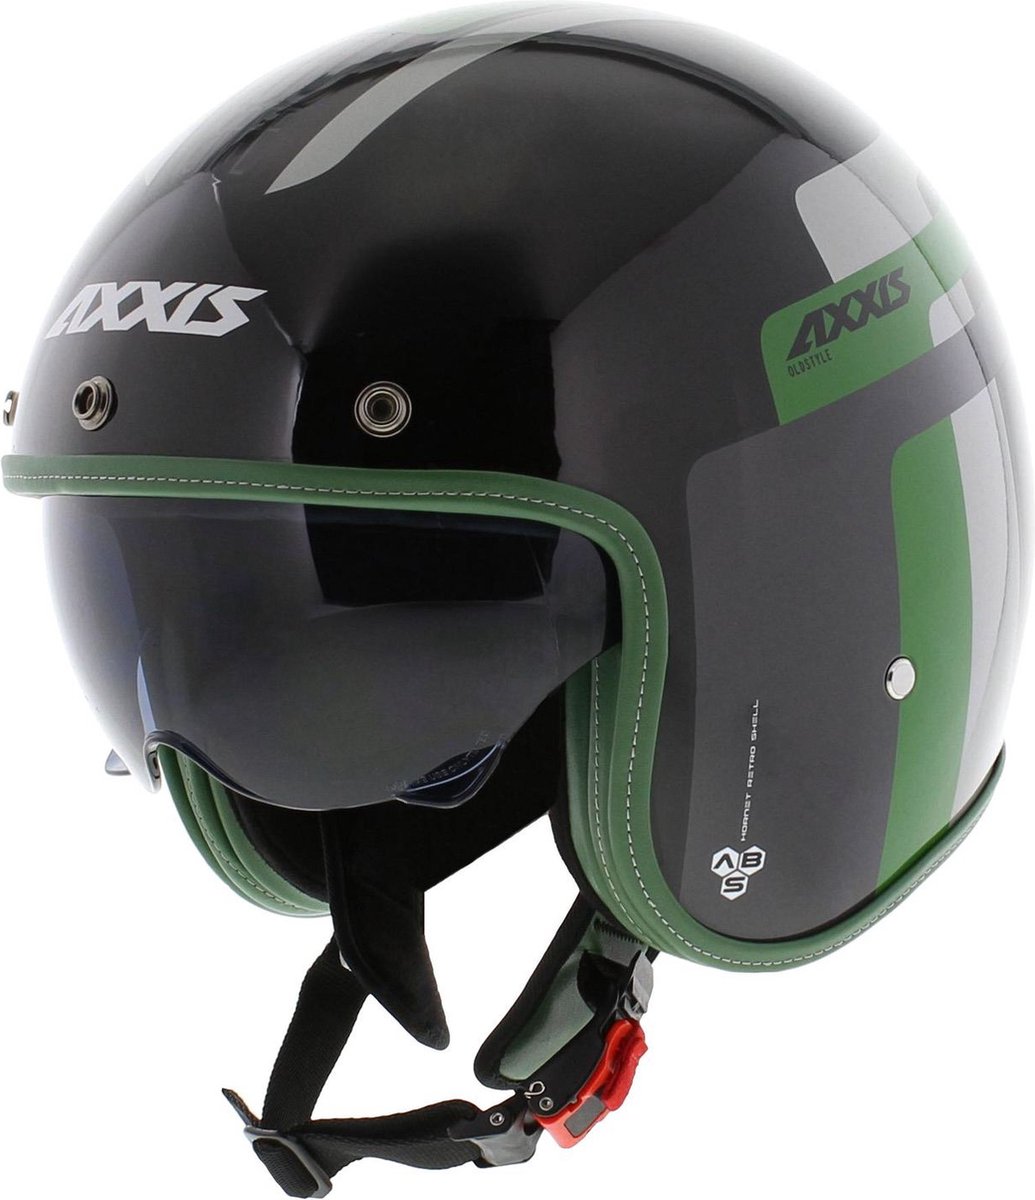 Axxis Hornet SV jethelm Old Style glans groen XL - Motor / Scooter helm